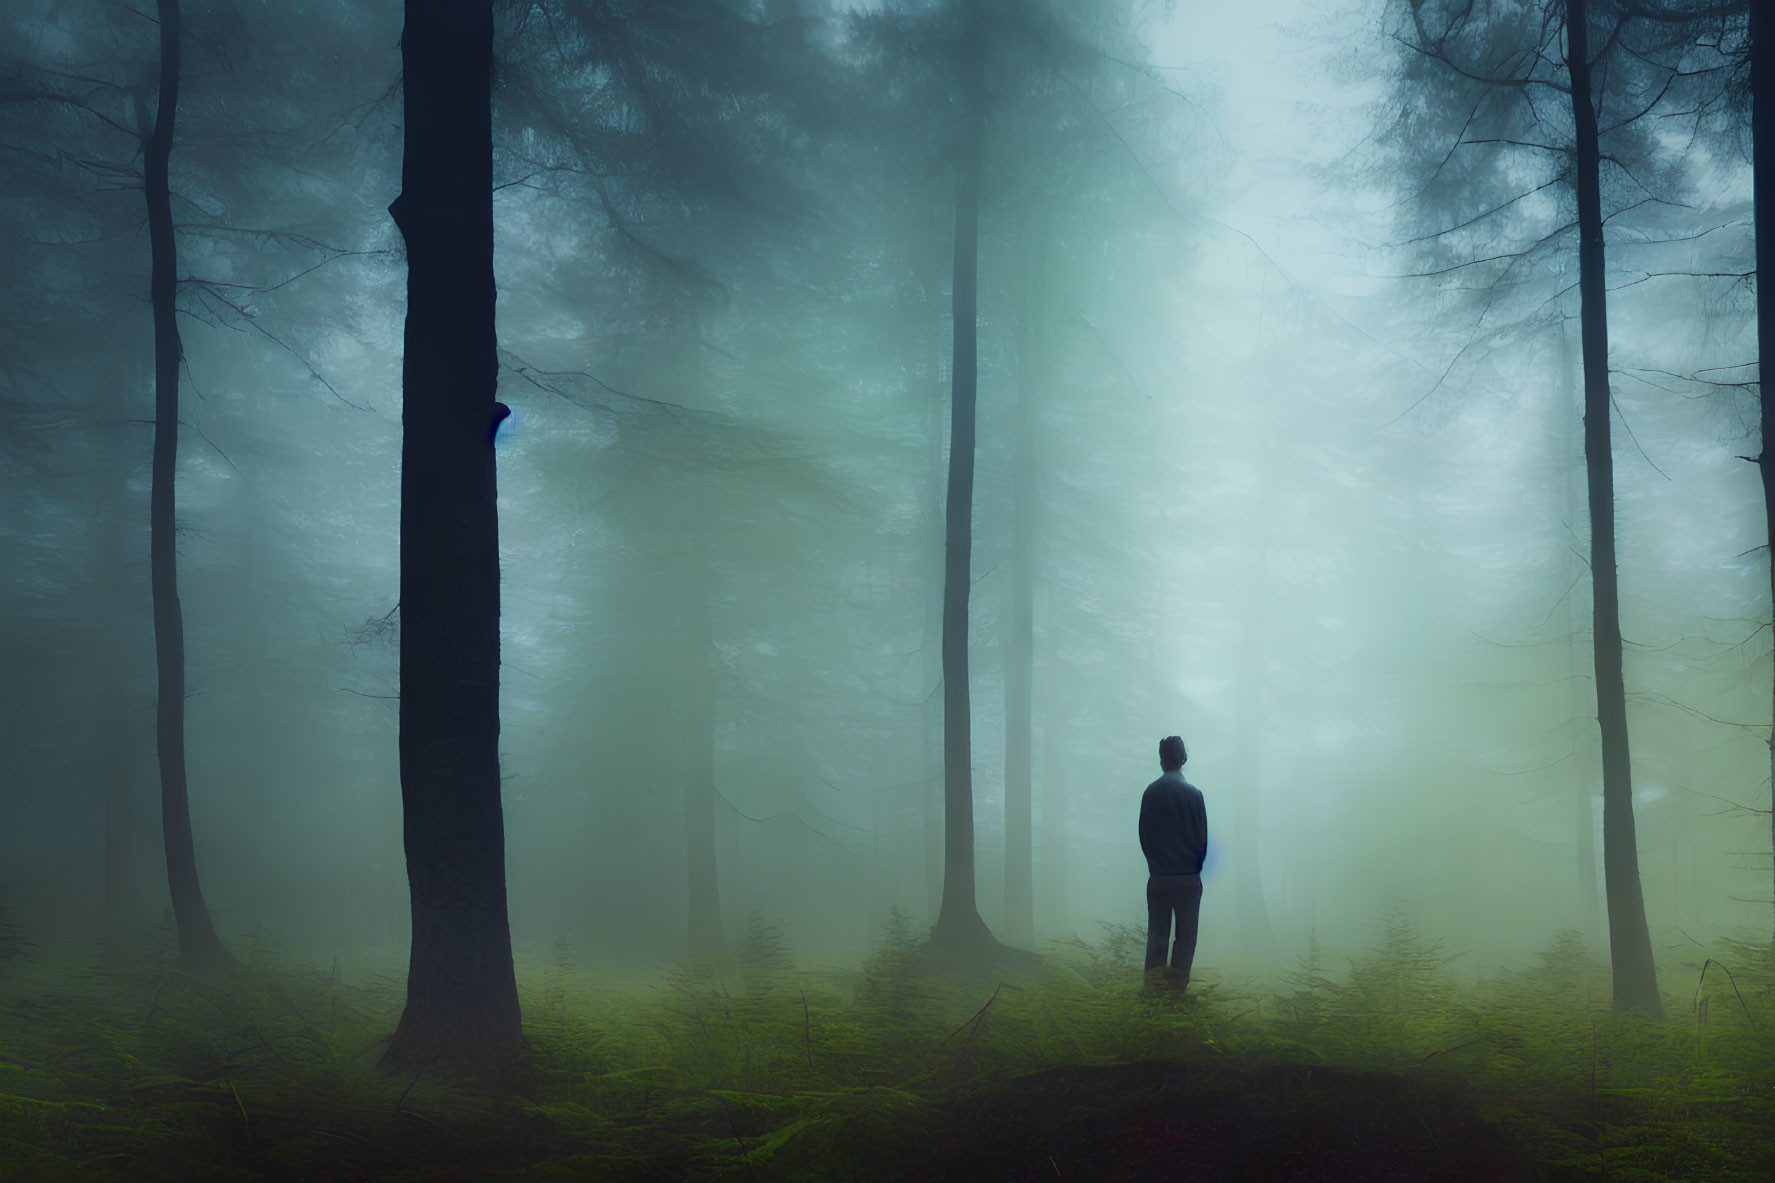 Lonely figure in misty forest with tall silhouetted trees